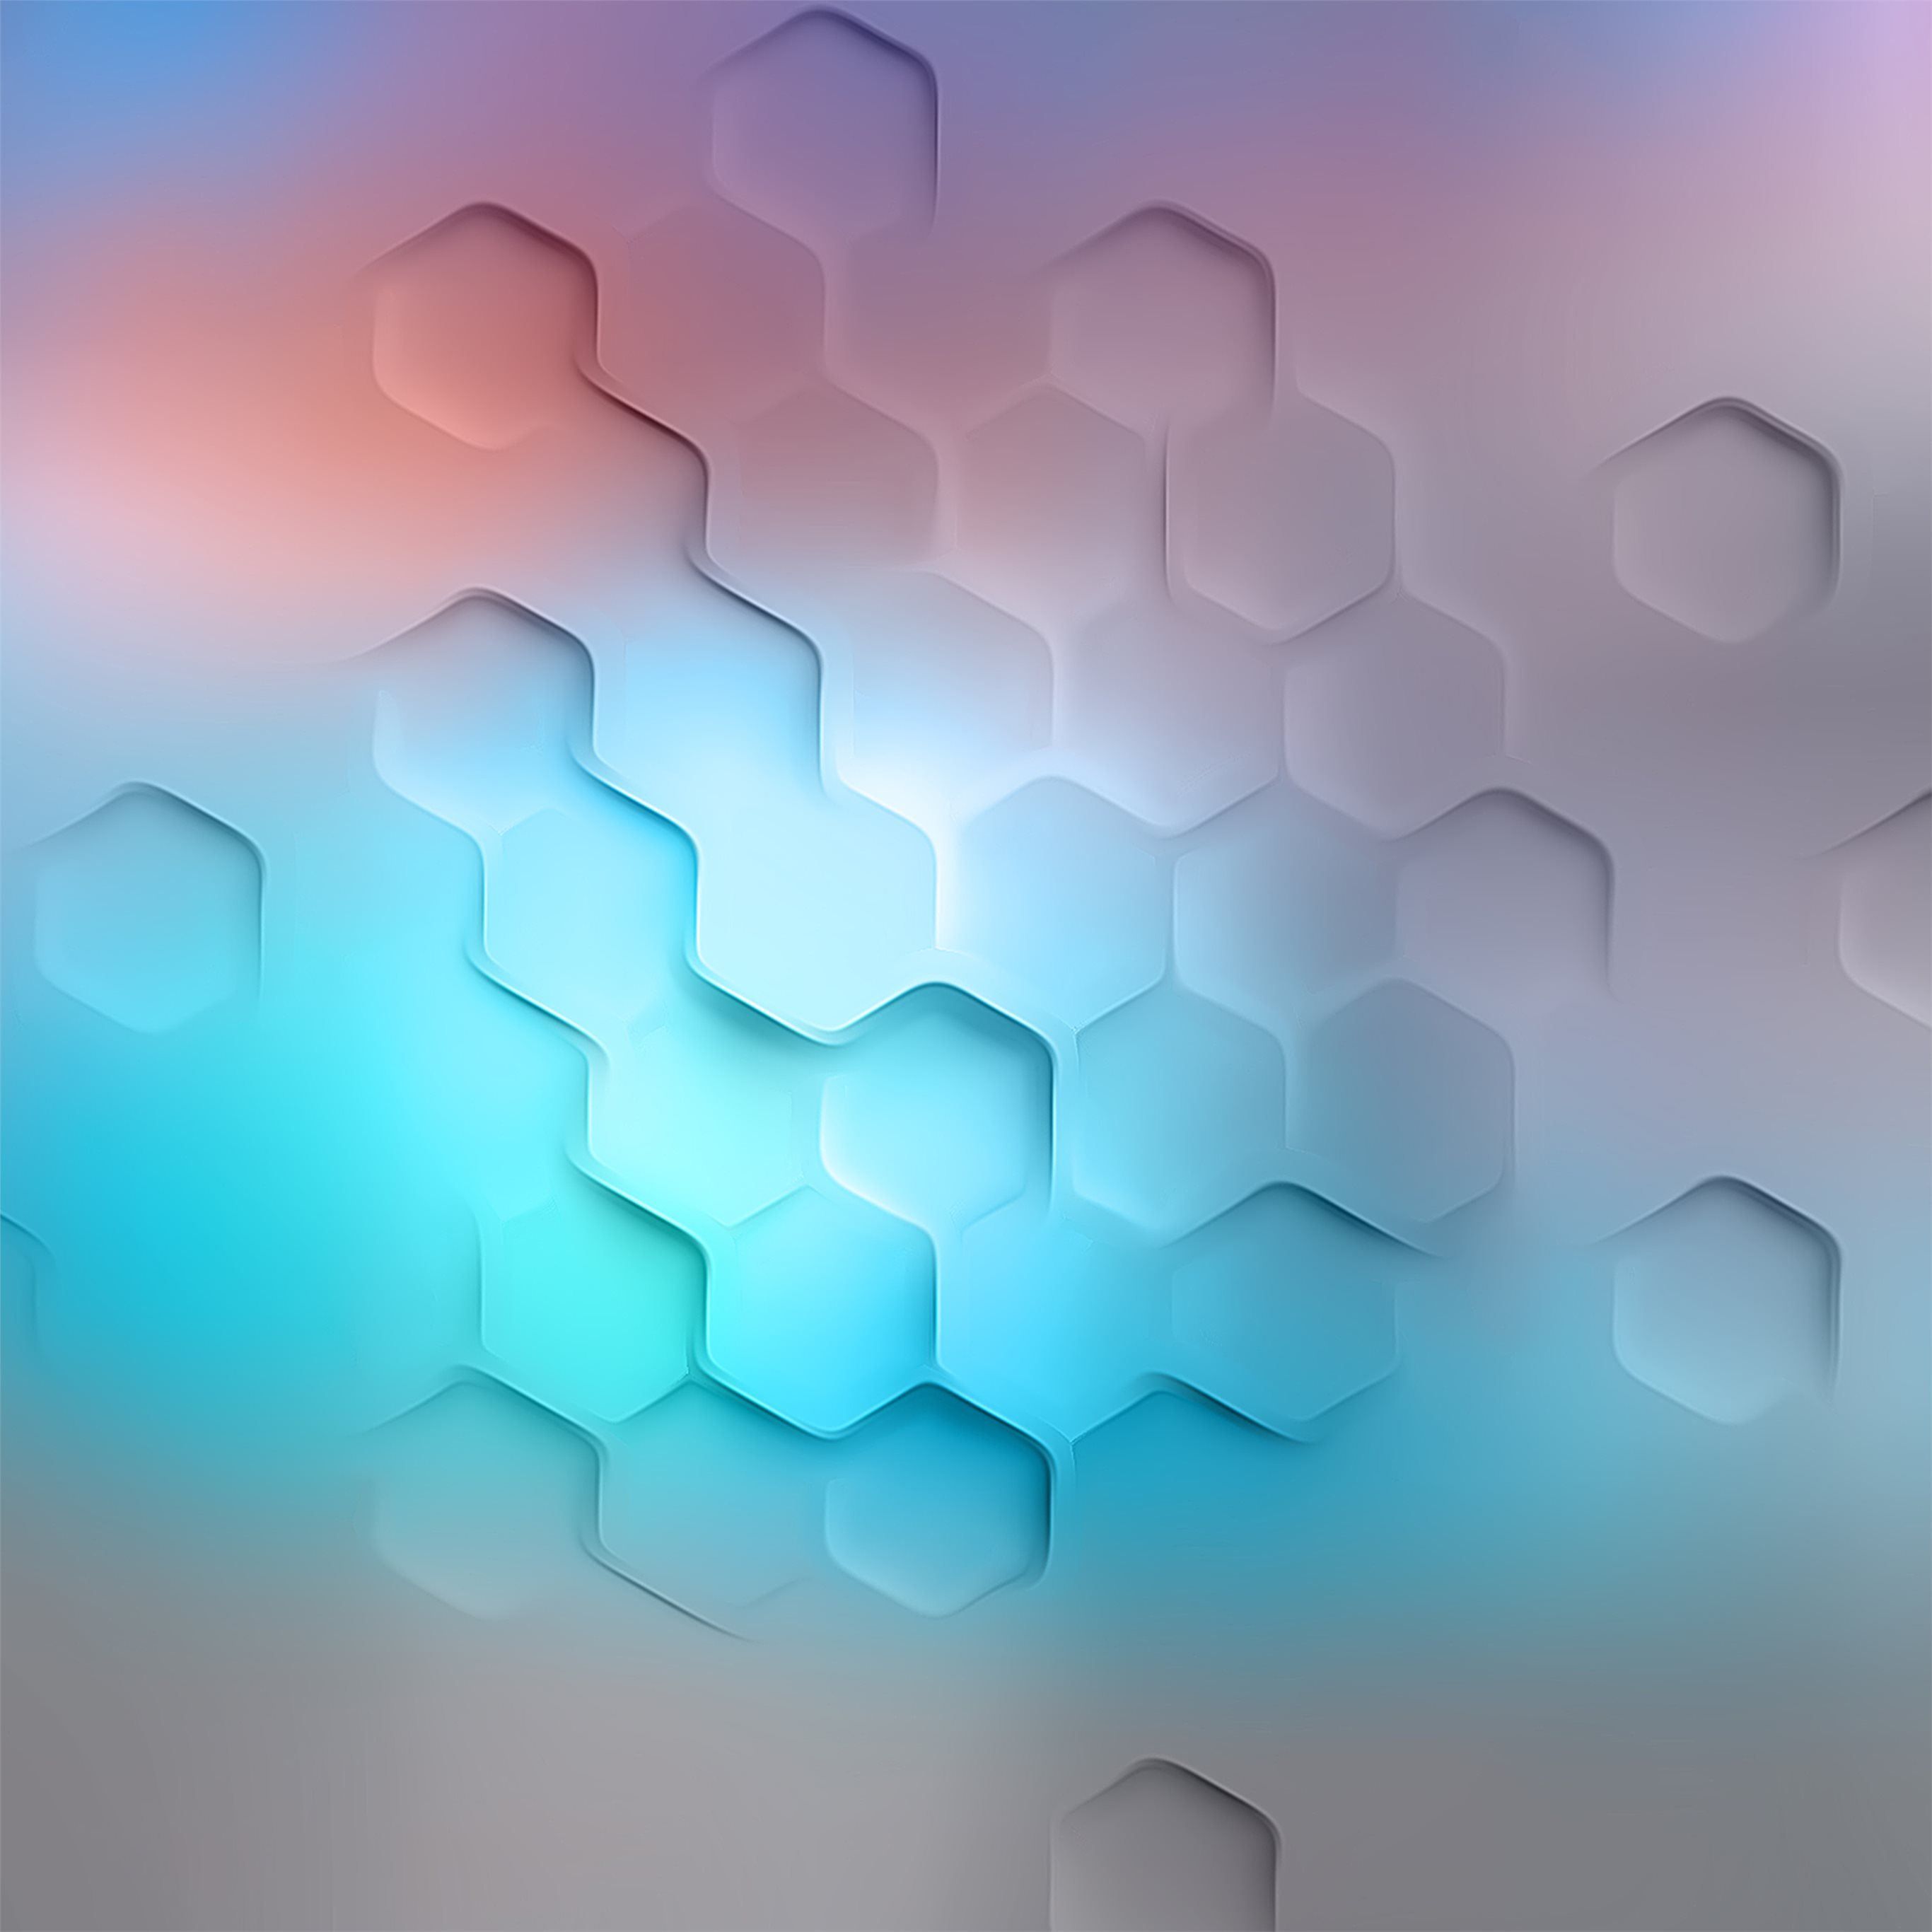 white polygon abstract 4k iPad Pro Wallpaper Free Download